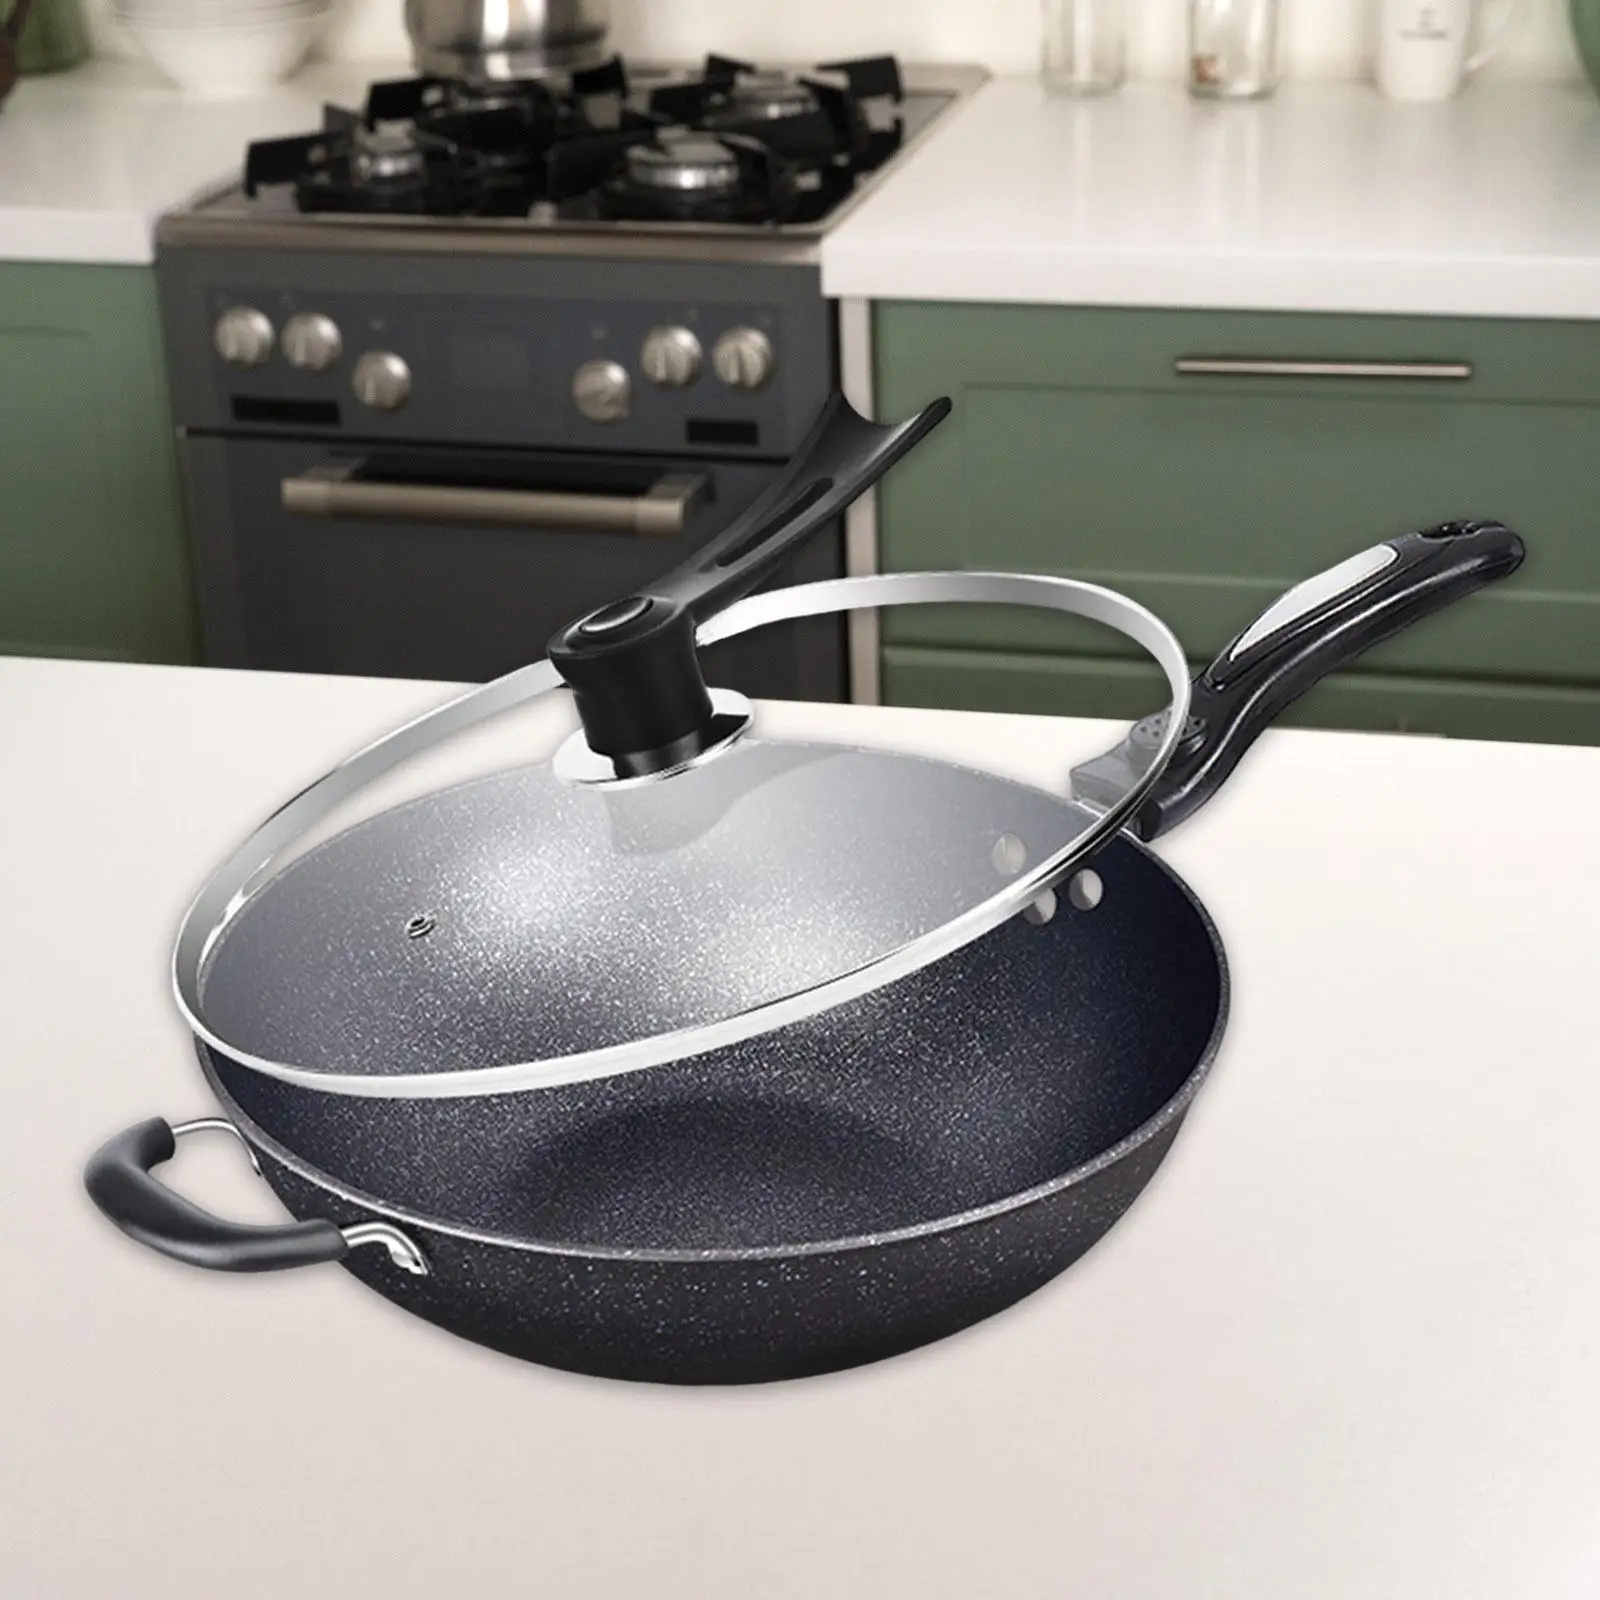 Wok Pan with Lids Saute wok Pan Nonstick No Coated Cooking Wok Nonstick Woks Stirfry Pans for Meat Toast Cheese Cake Omelets